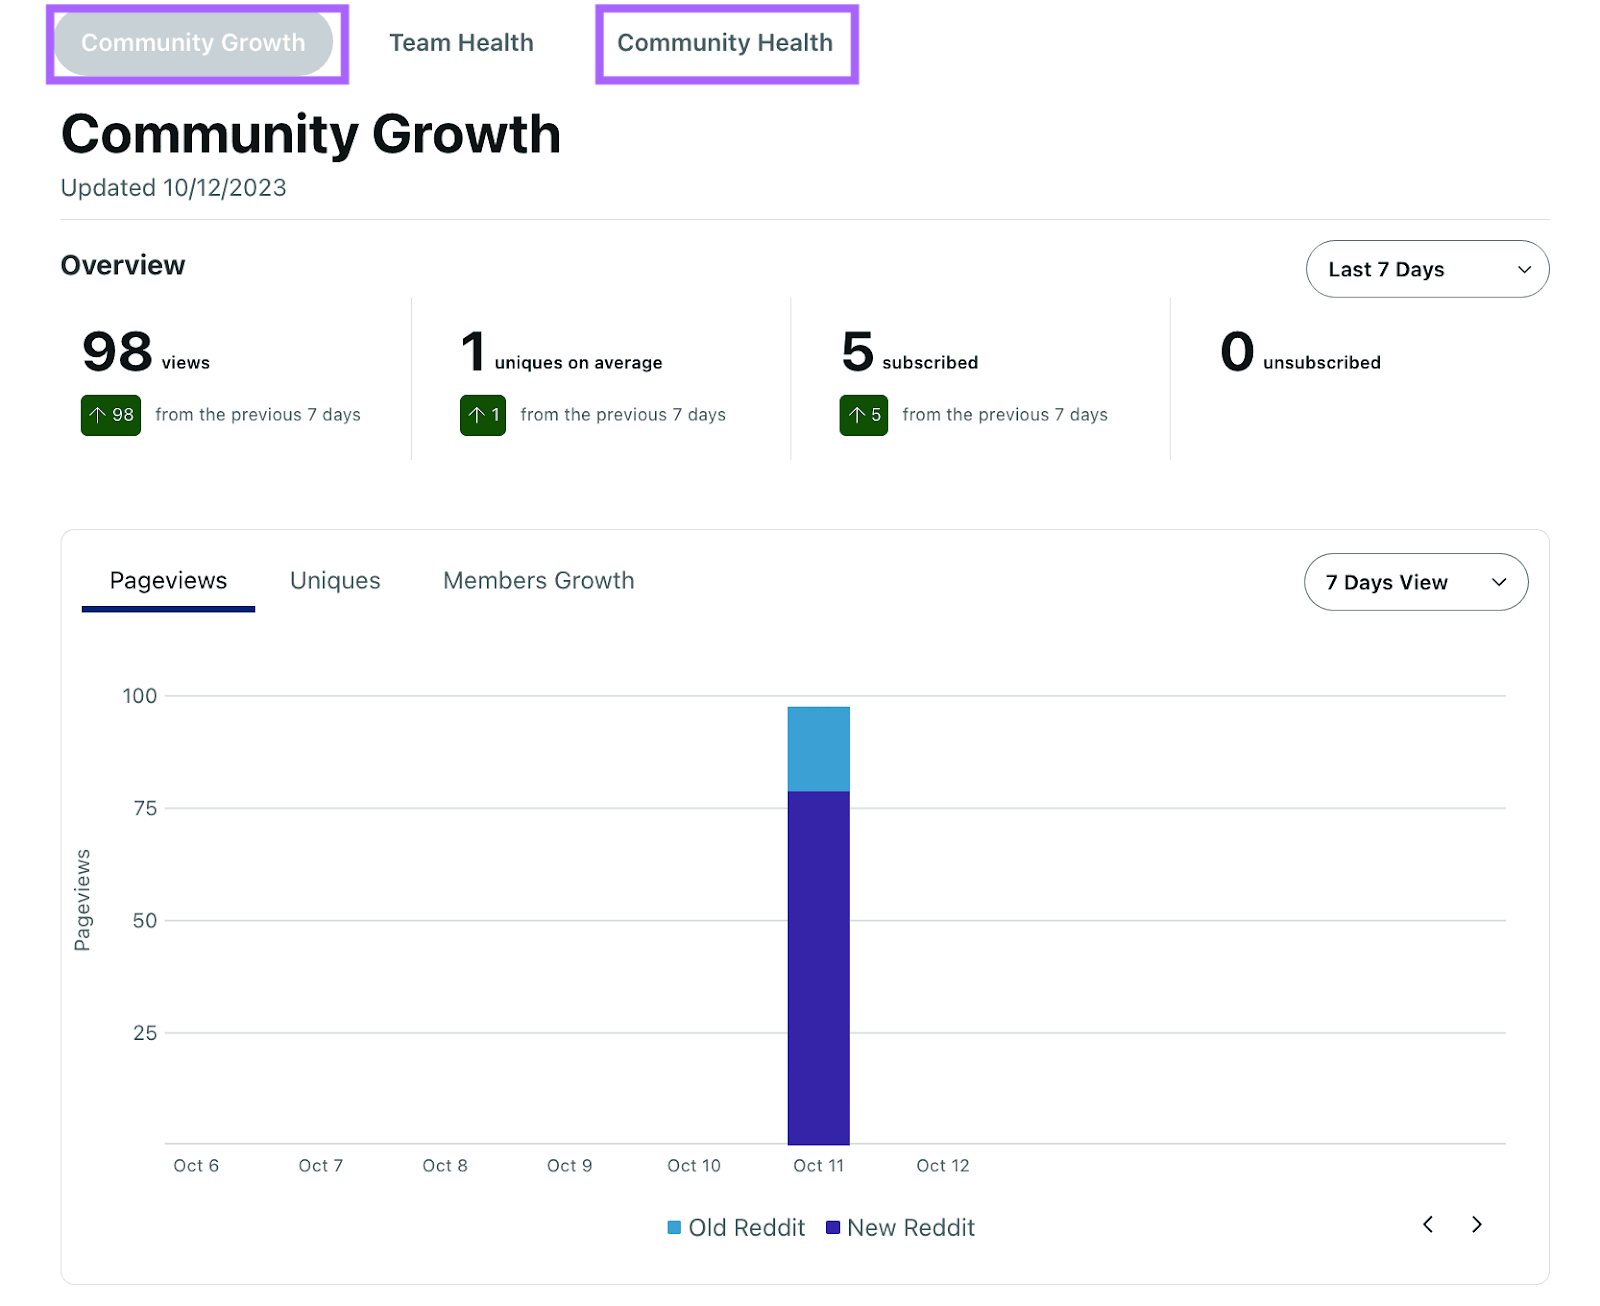 "Community Growth" overview report